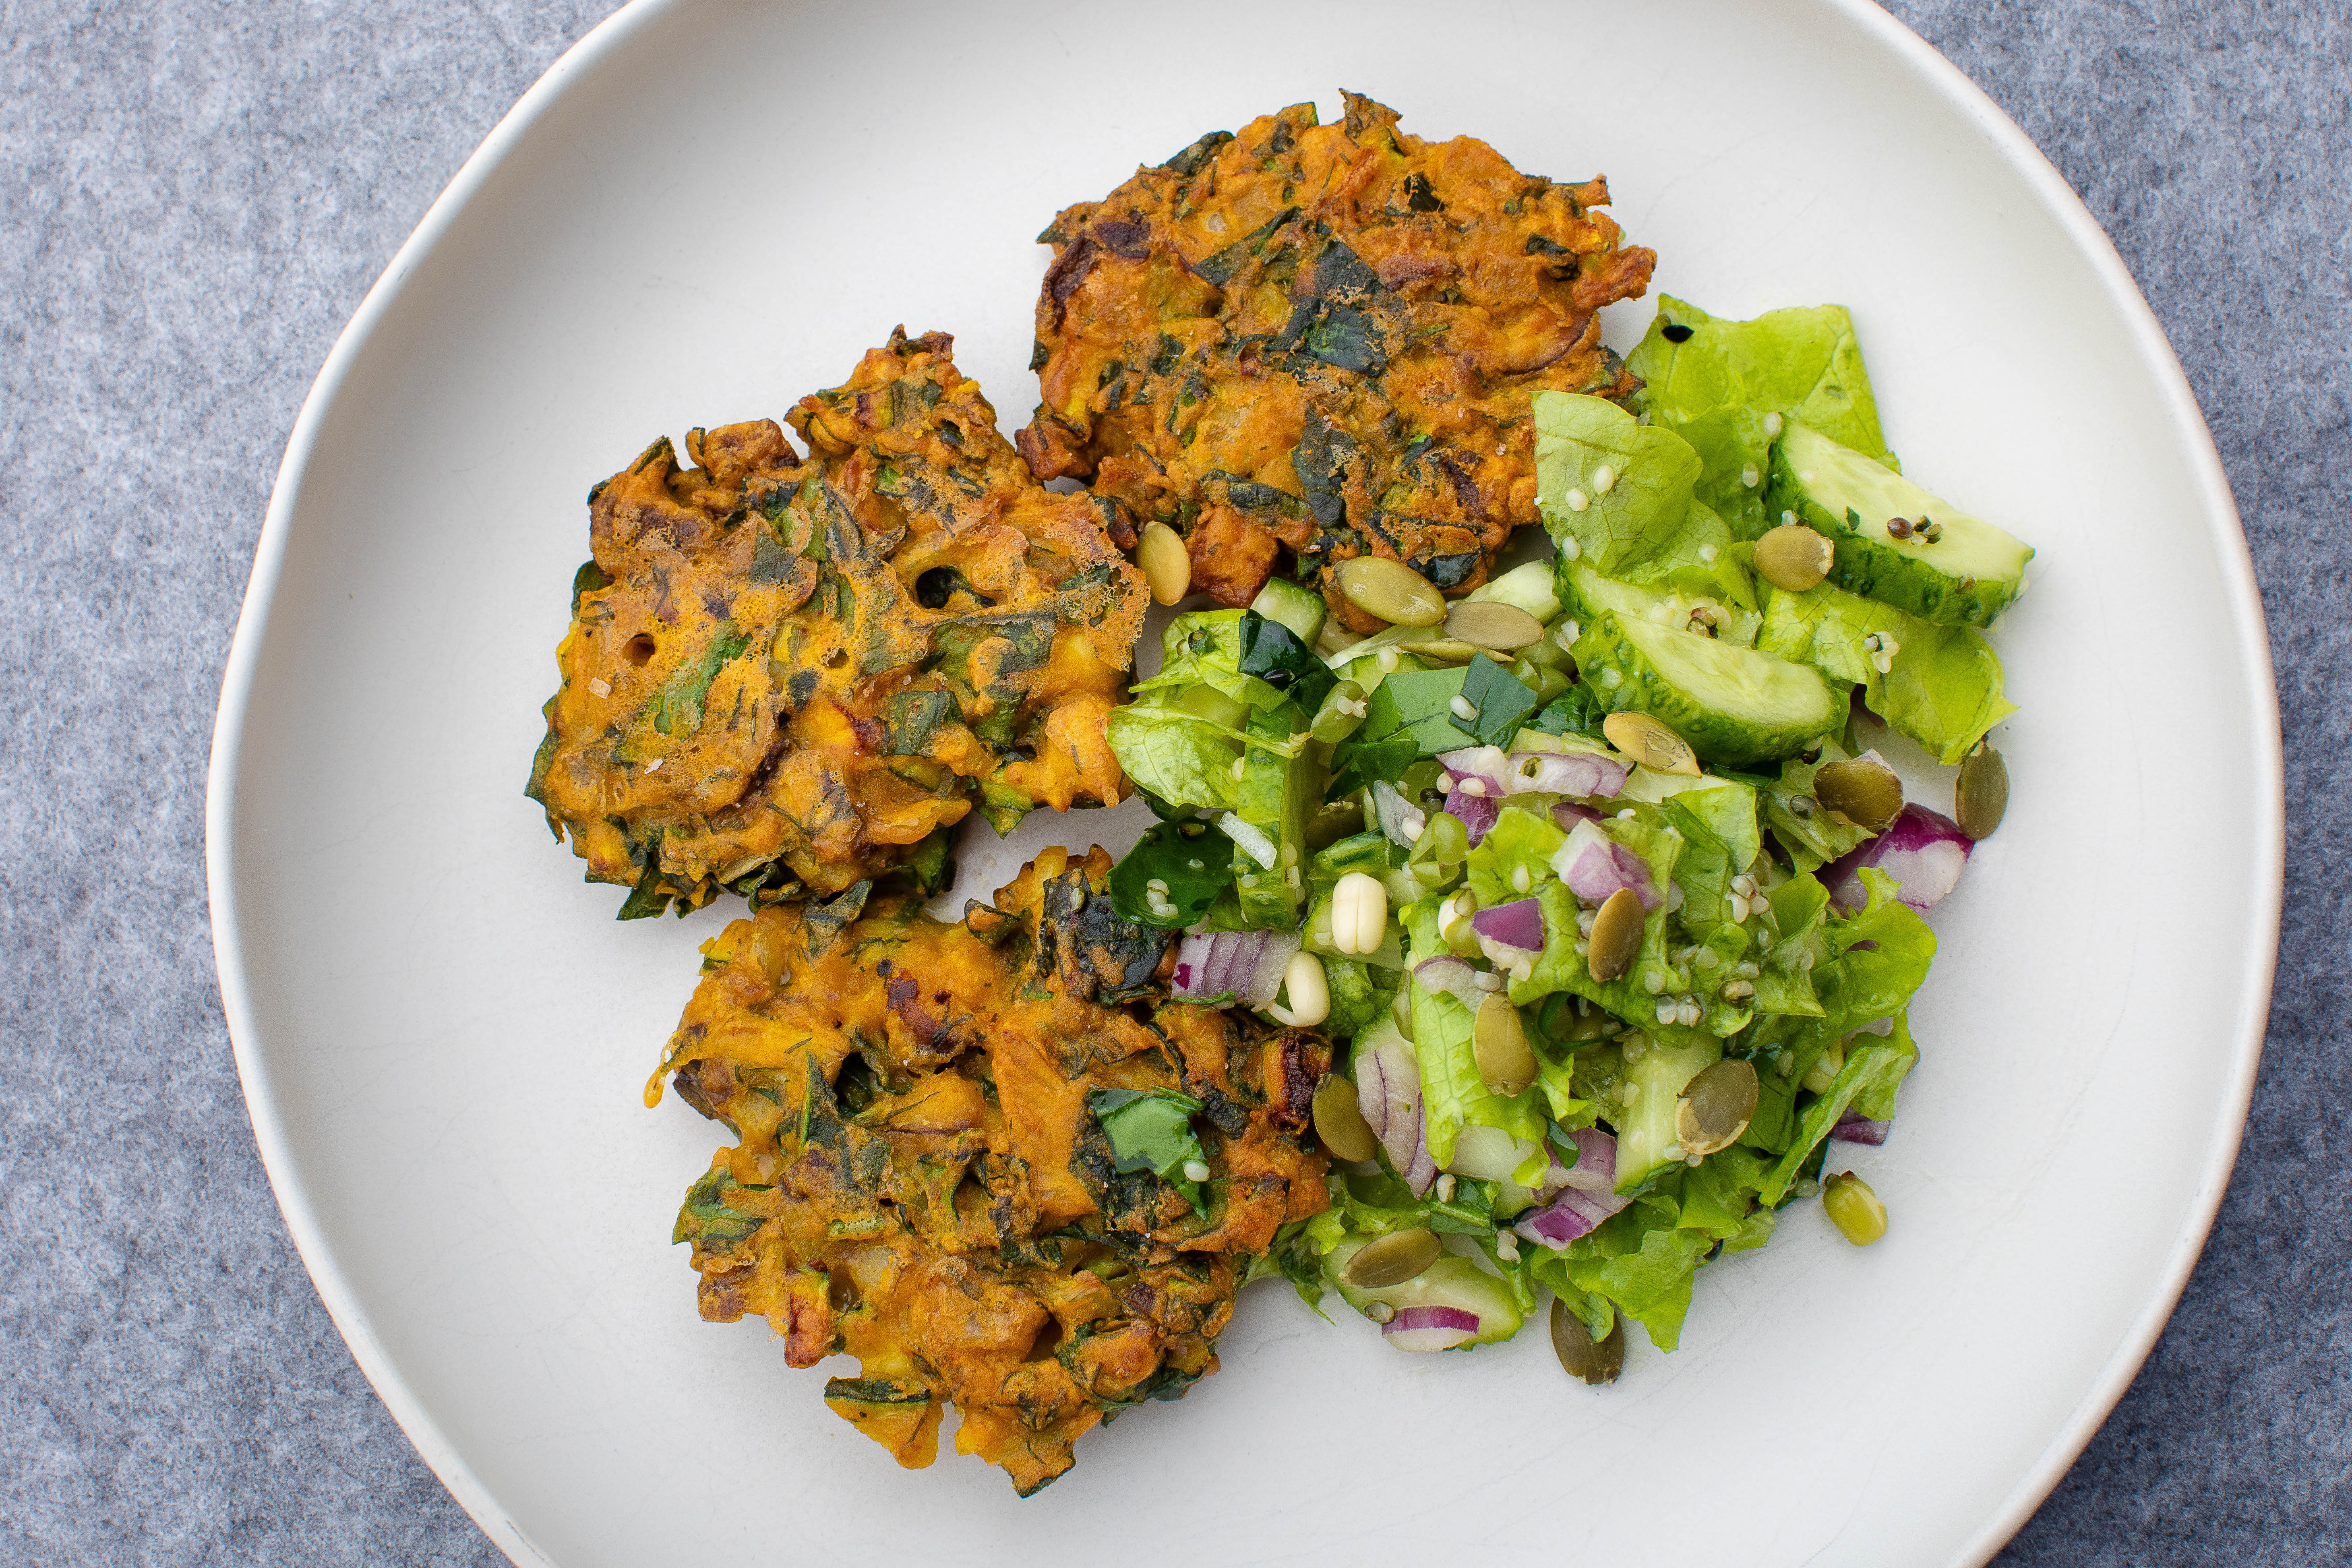 Chickpea and vegetable patties